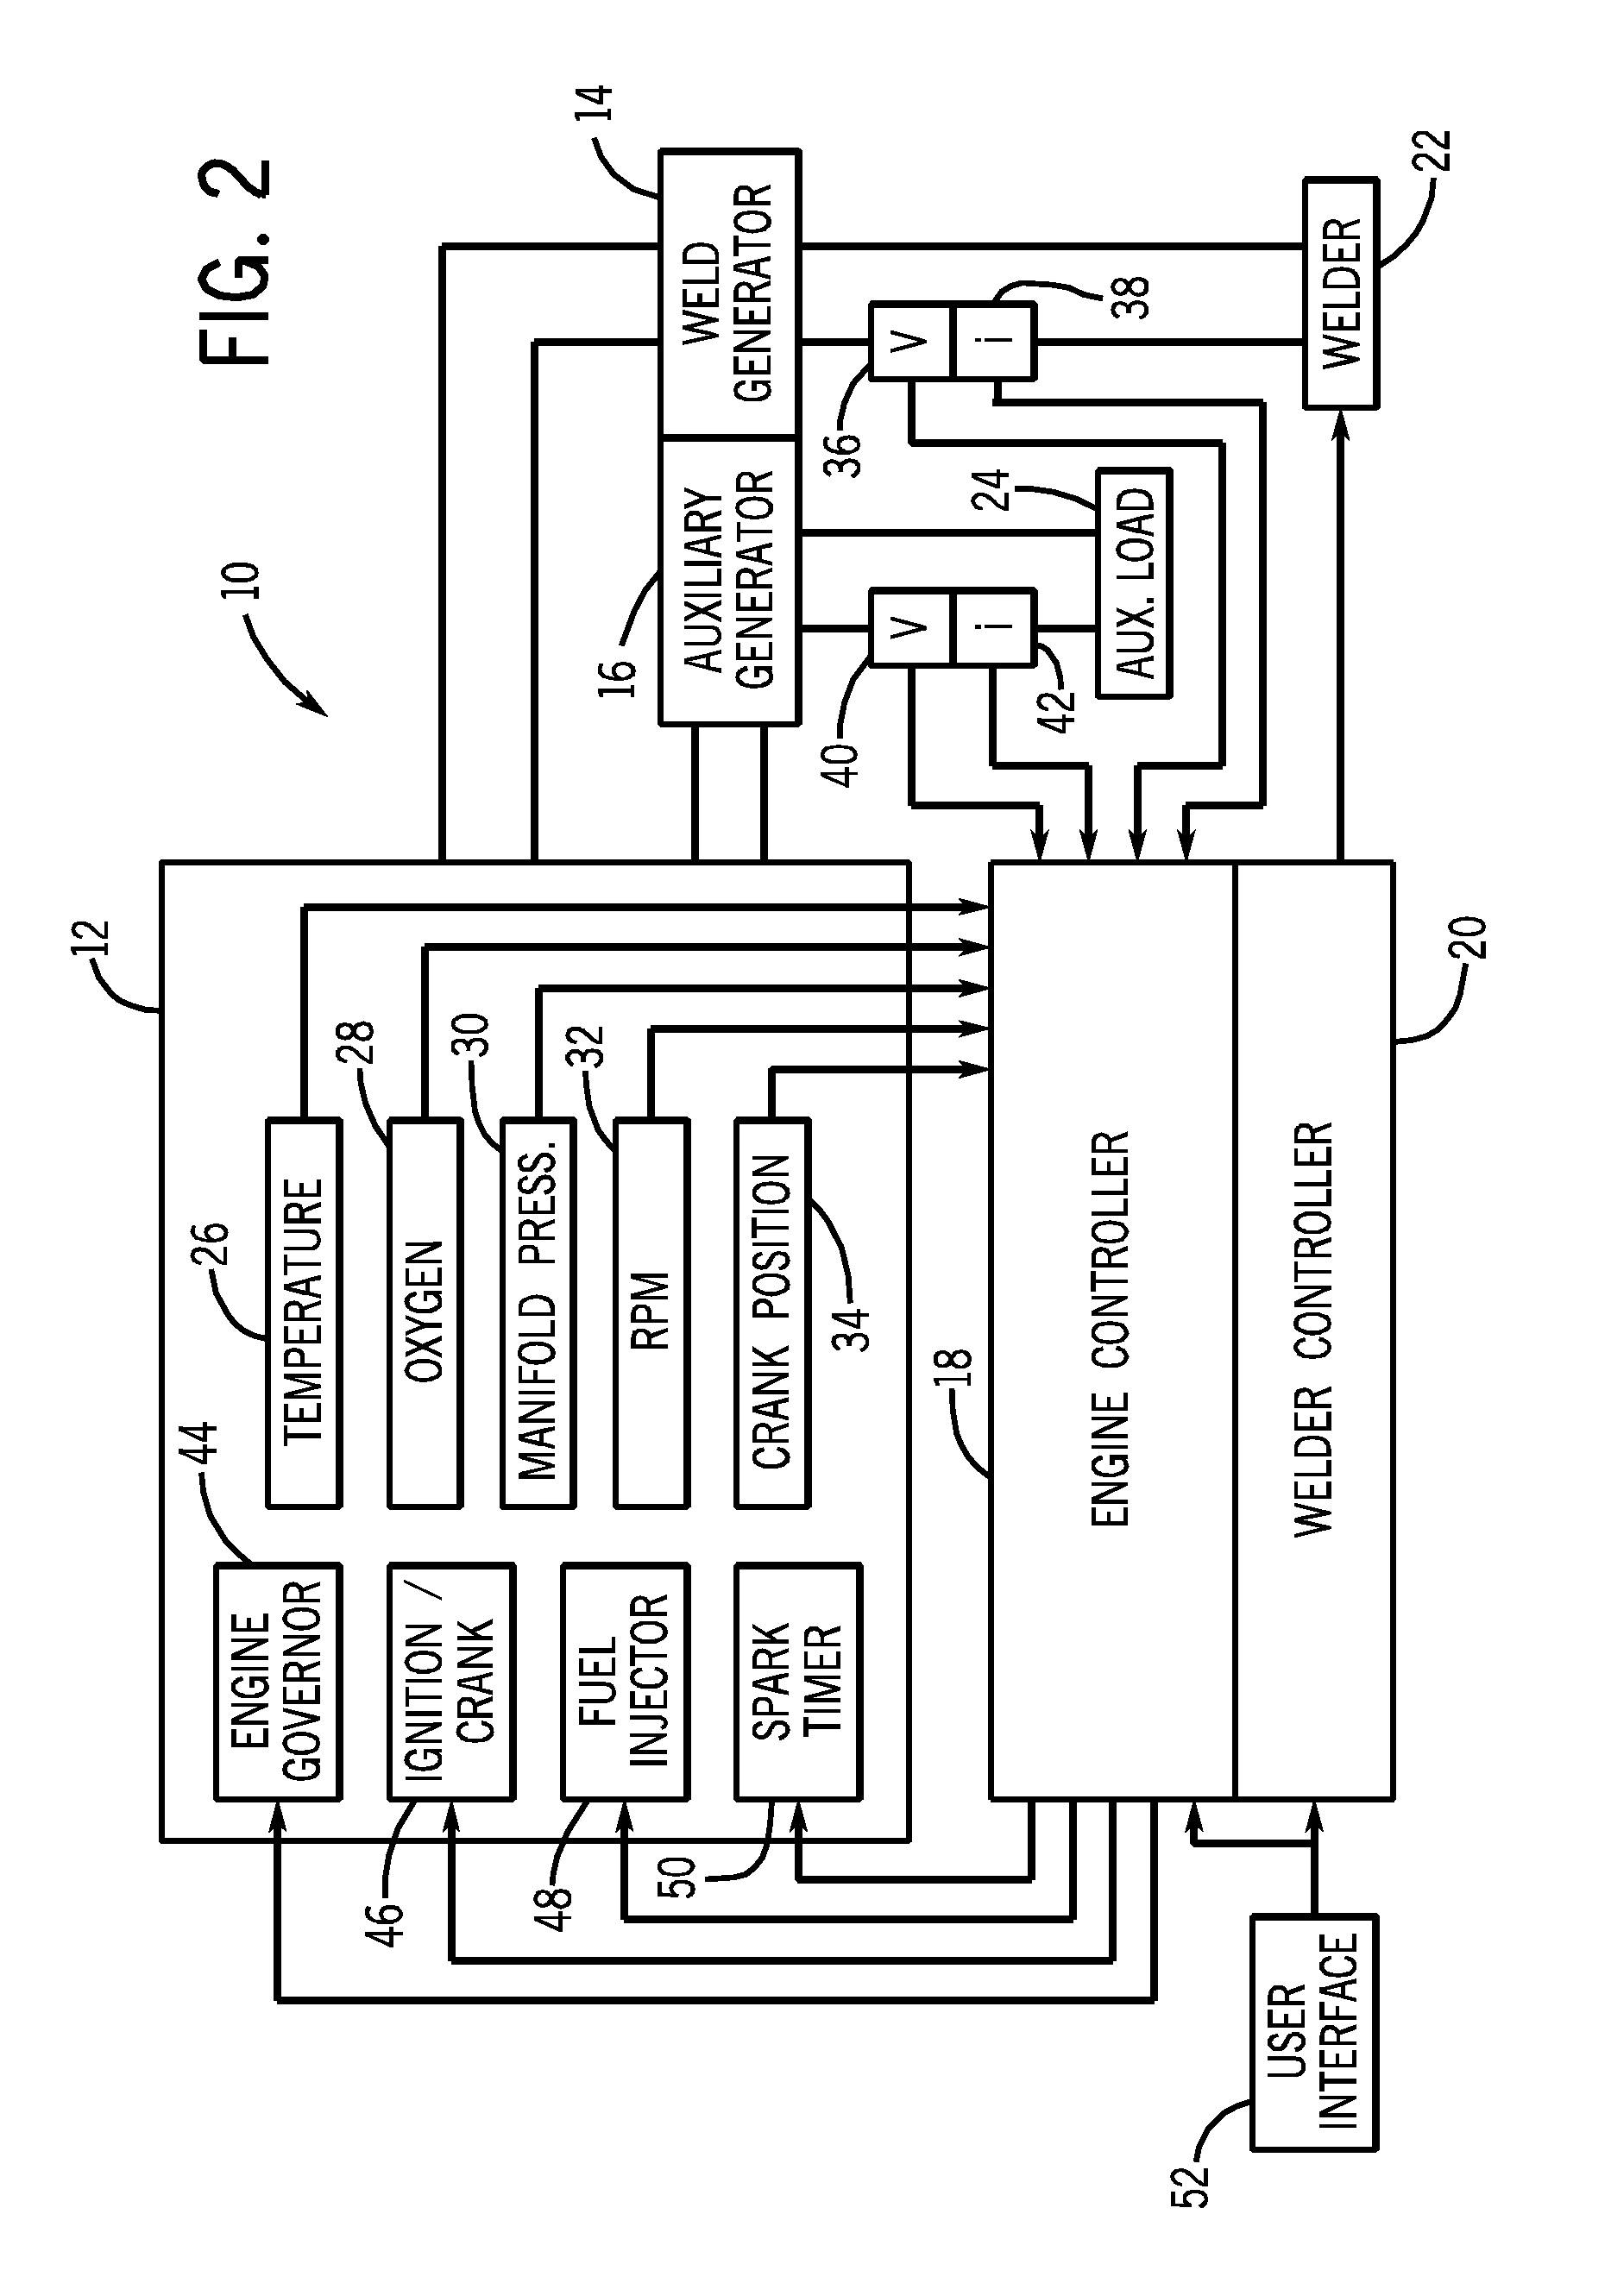 Weld setting based engine-driven generator control system and method